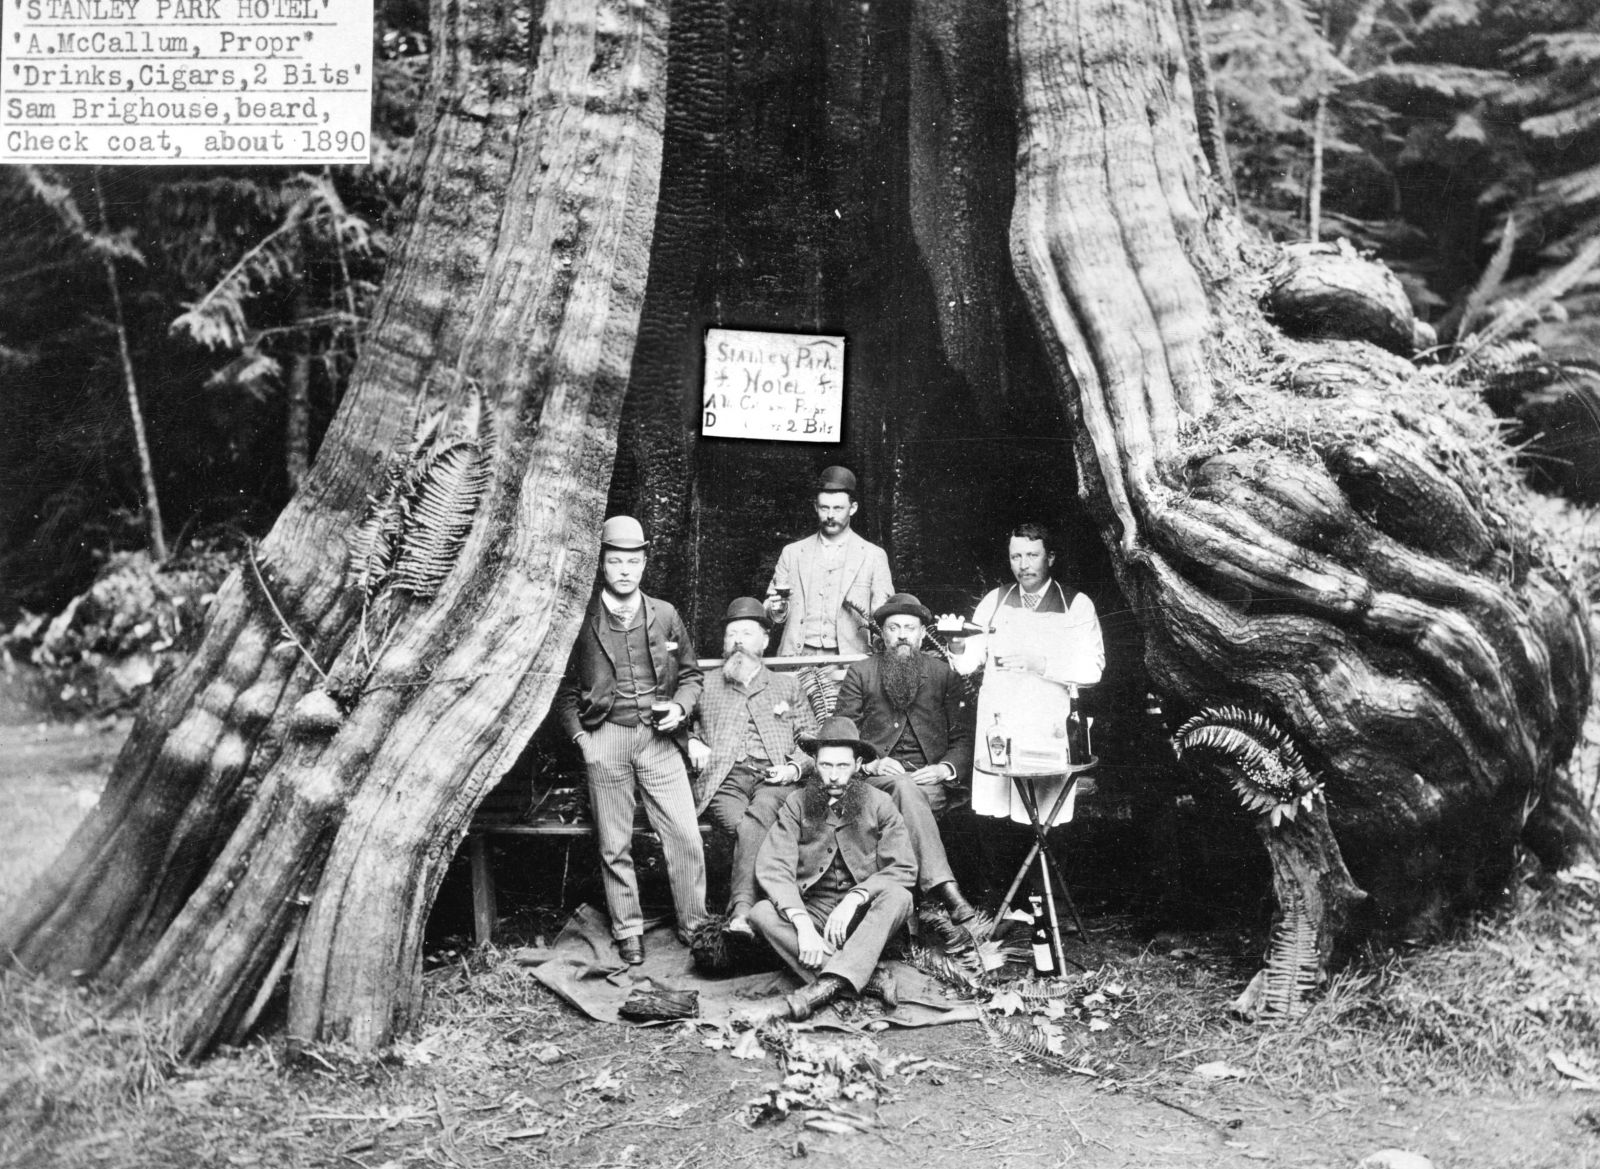 The Hollow Tree In Stanley Park, BC